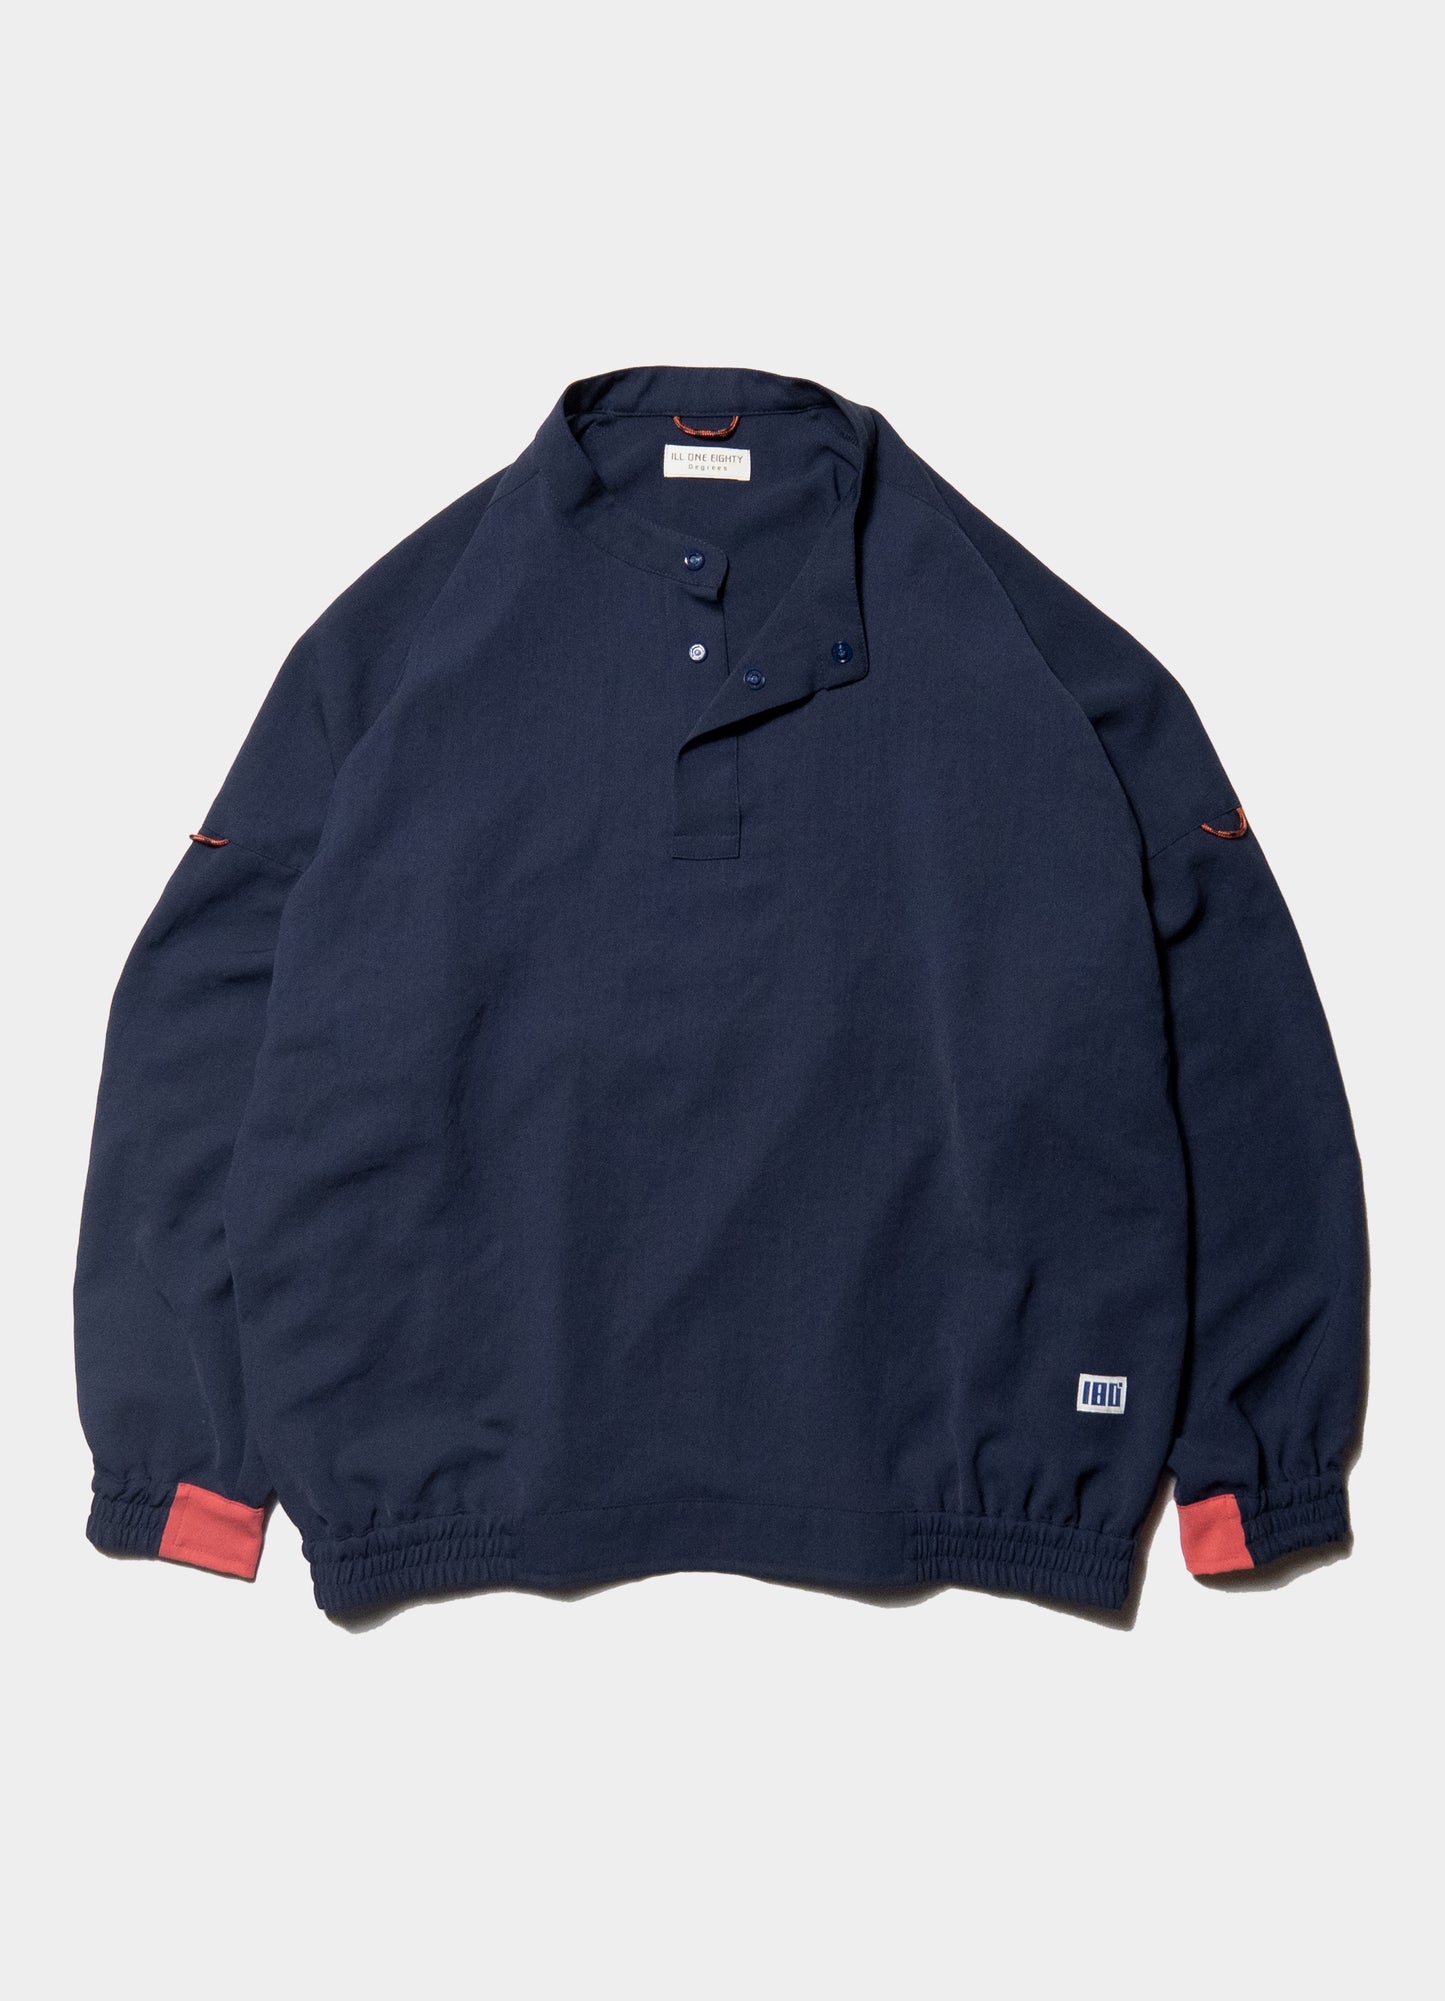 WEST WIND PULLOVER [ILL241-02]